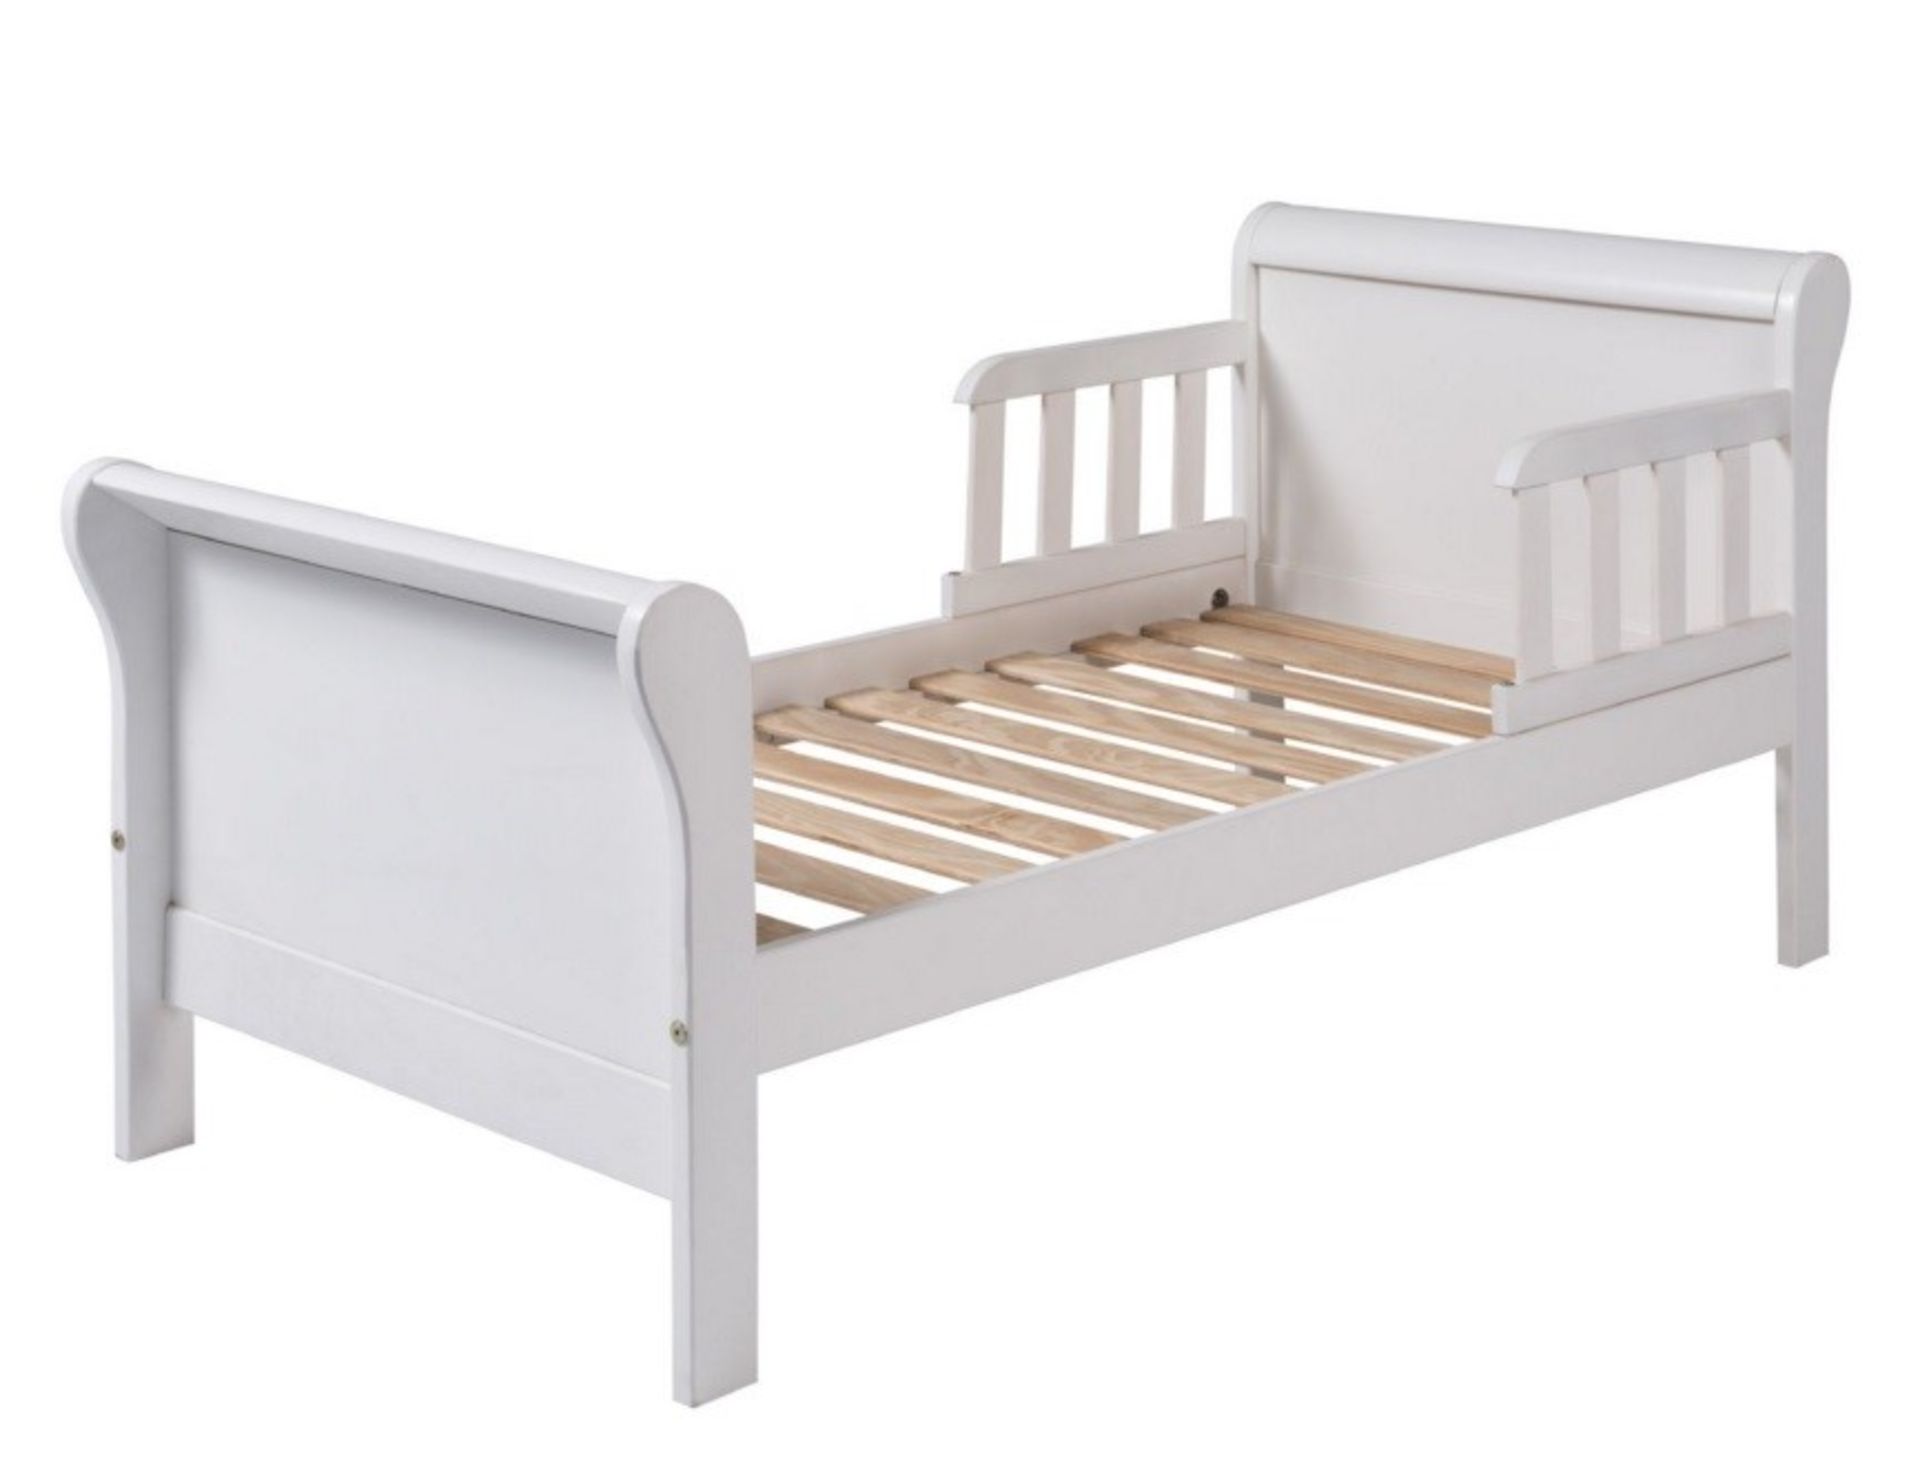 1 x Daisy Sleigh Bed Frame in White - Solid Wood - Features Siderails - Bedroom Nursery - Ideal - Image 2 of 2